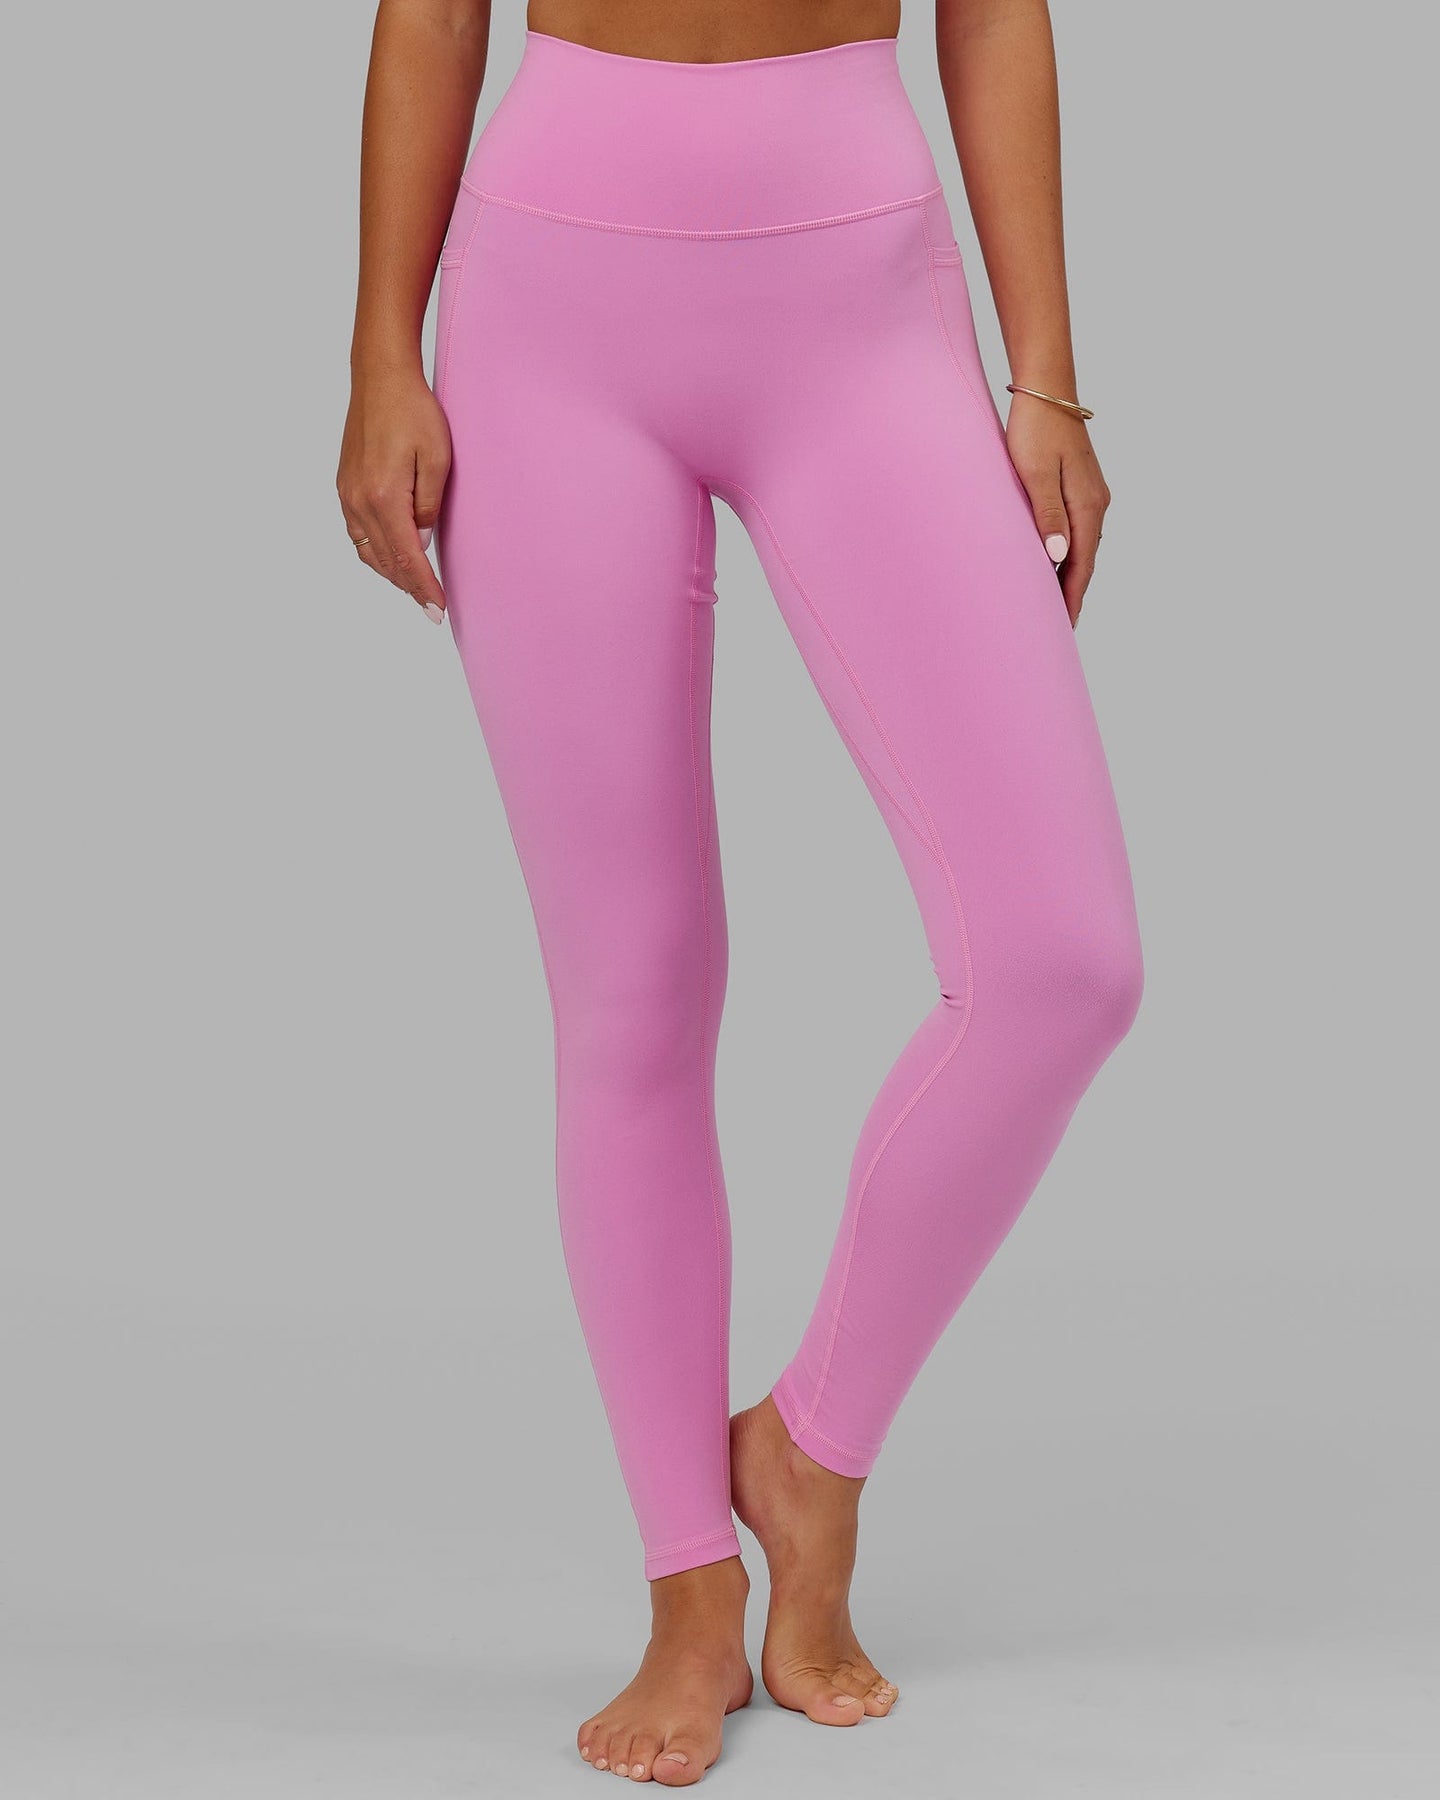 Fusion X-Long Tights - Spark Pink | LSKD